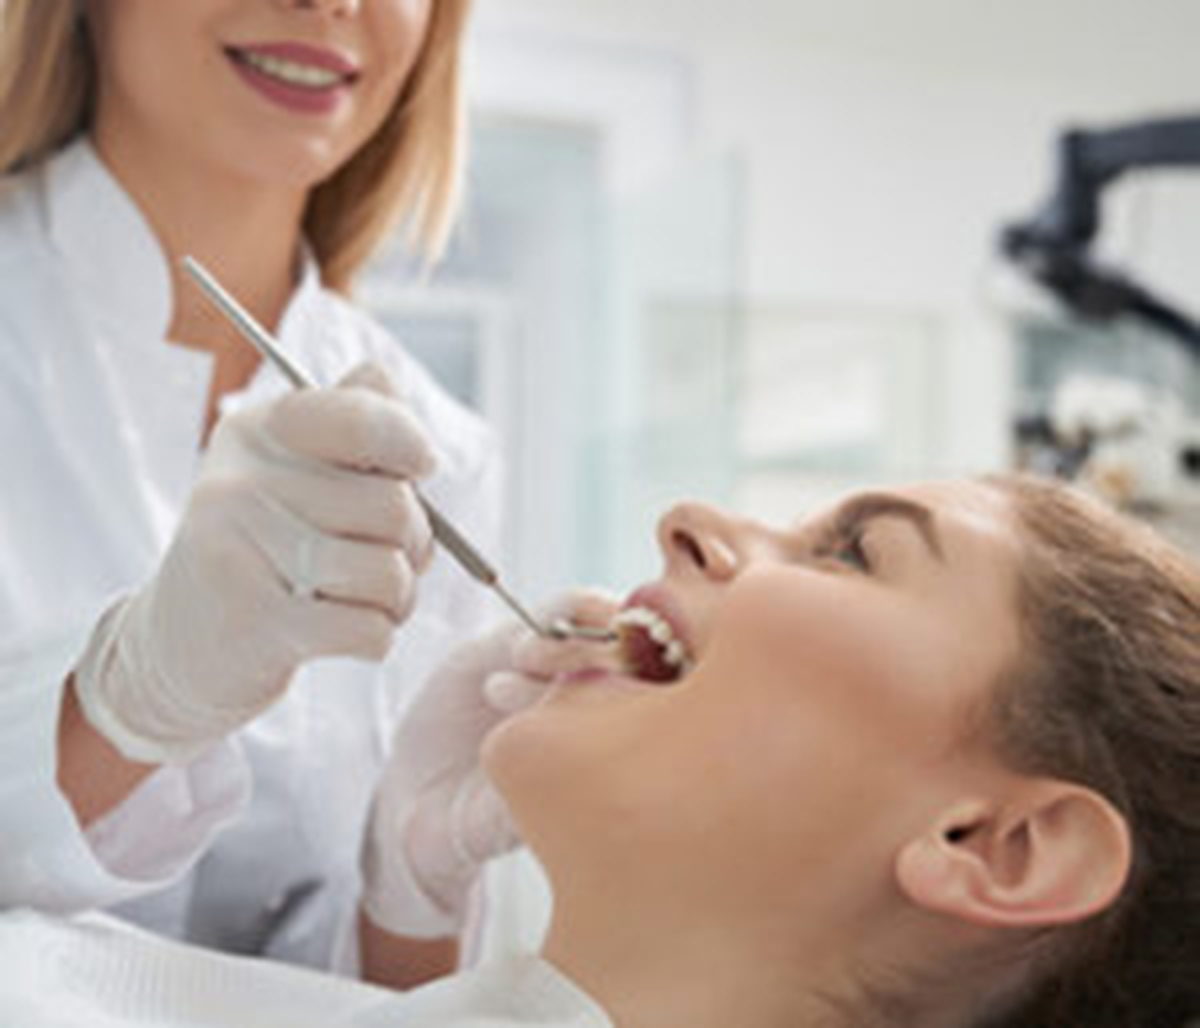 Patients in Maine ask, “What is BANA testing for periodontal disease?”